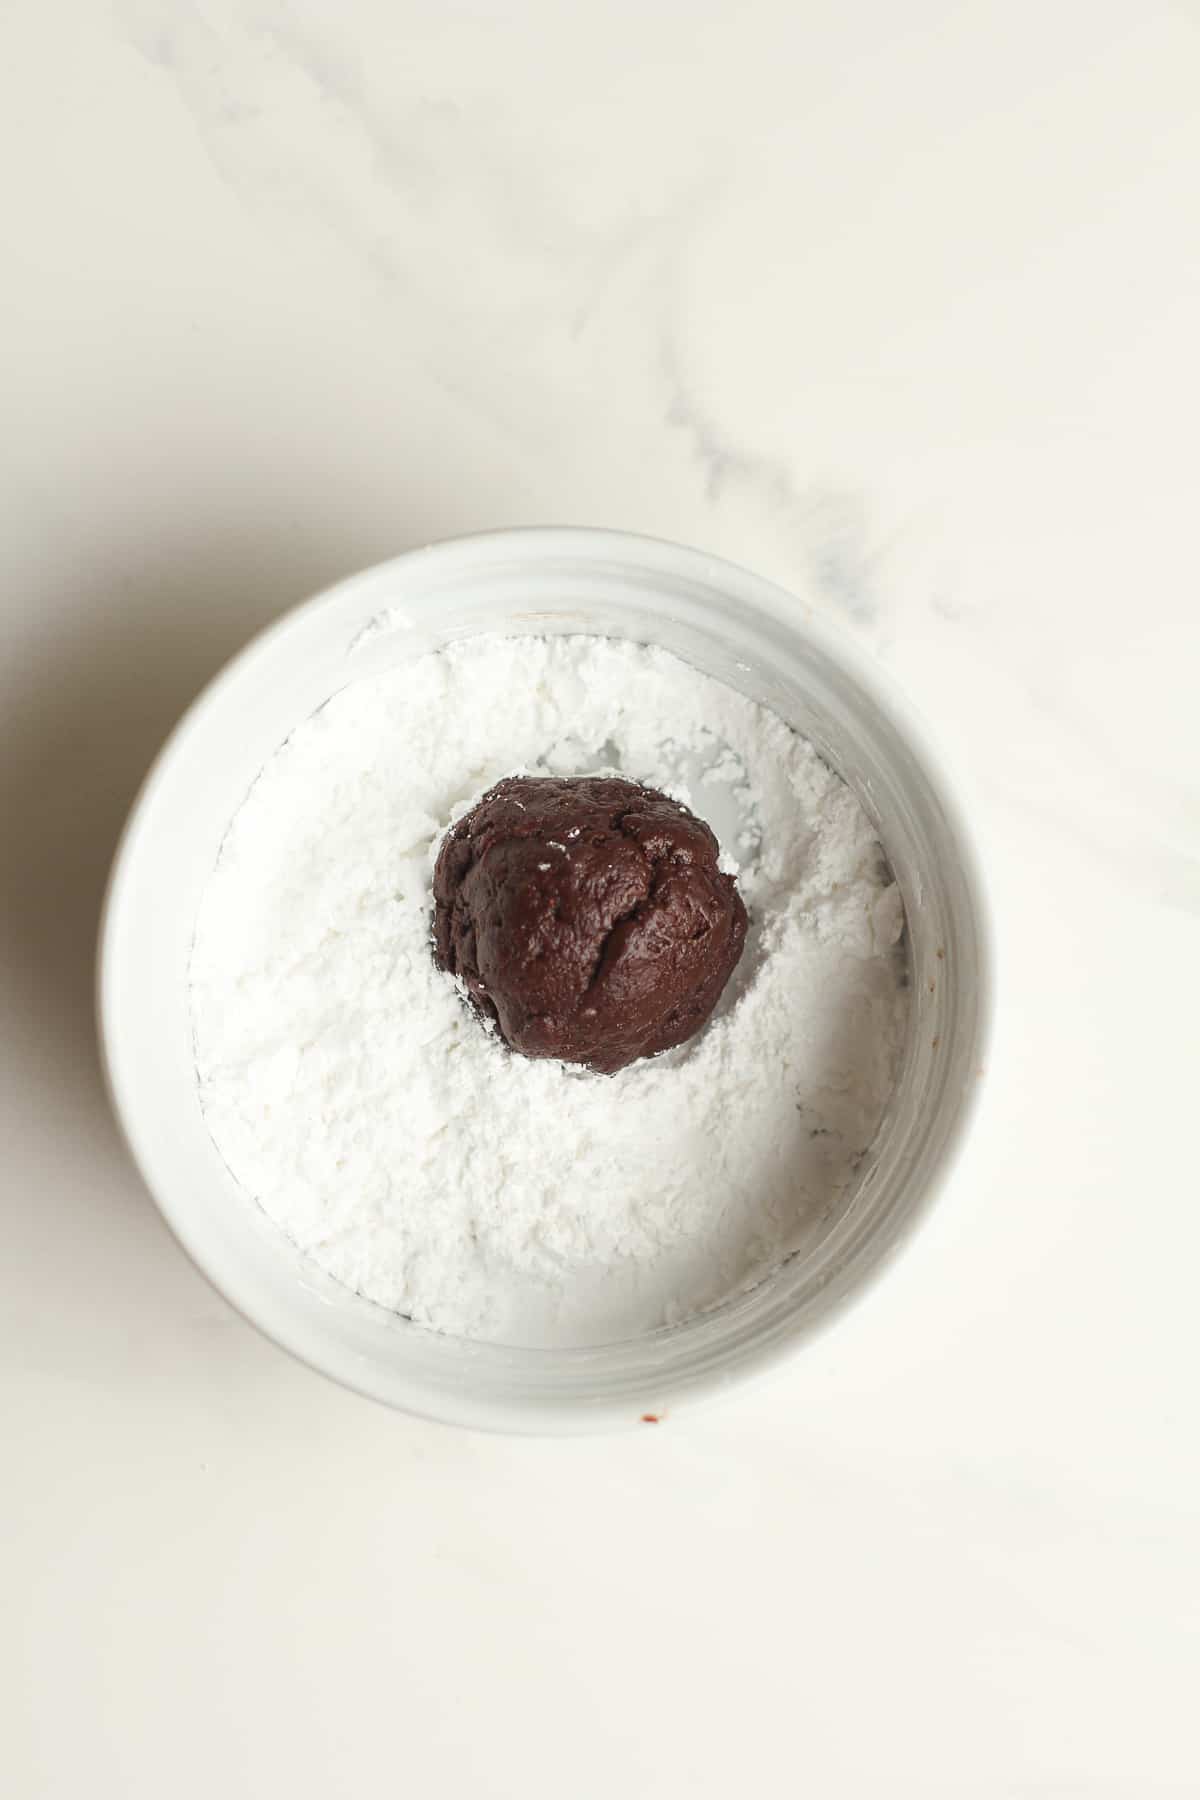 A bowl of the powdered sugar with a cookie ball.